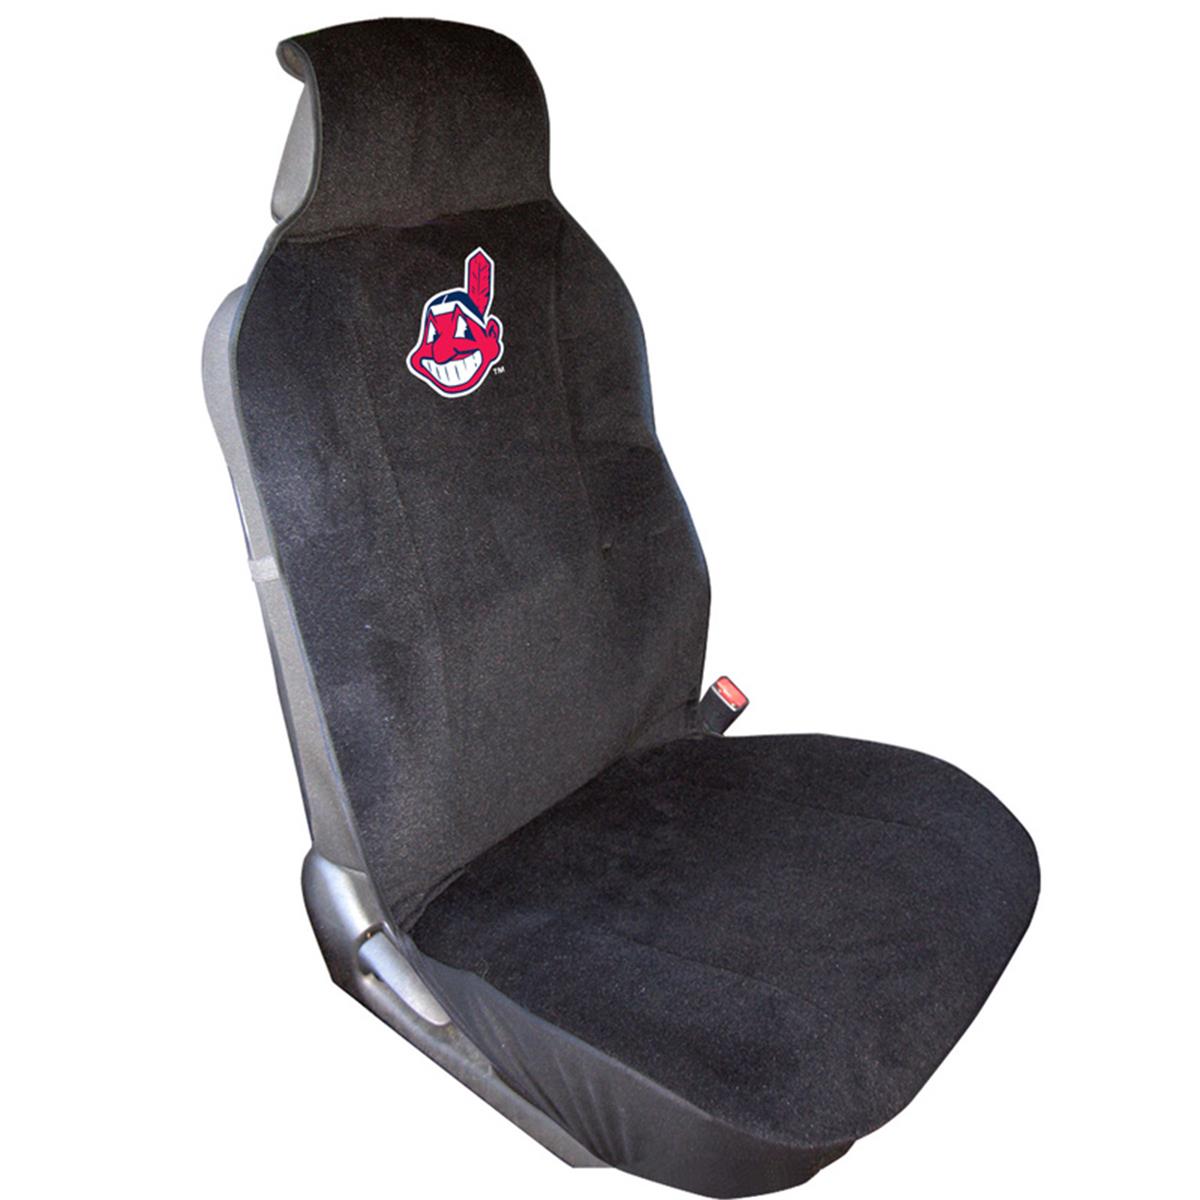 Picture of Fremont Die 2324566805 MLB Cleveland Indians Seat Cover - Chief Wahoo Design